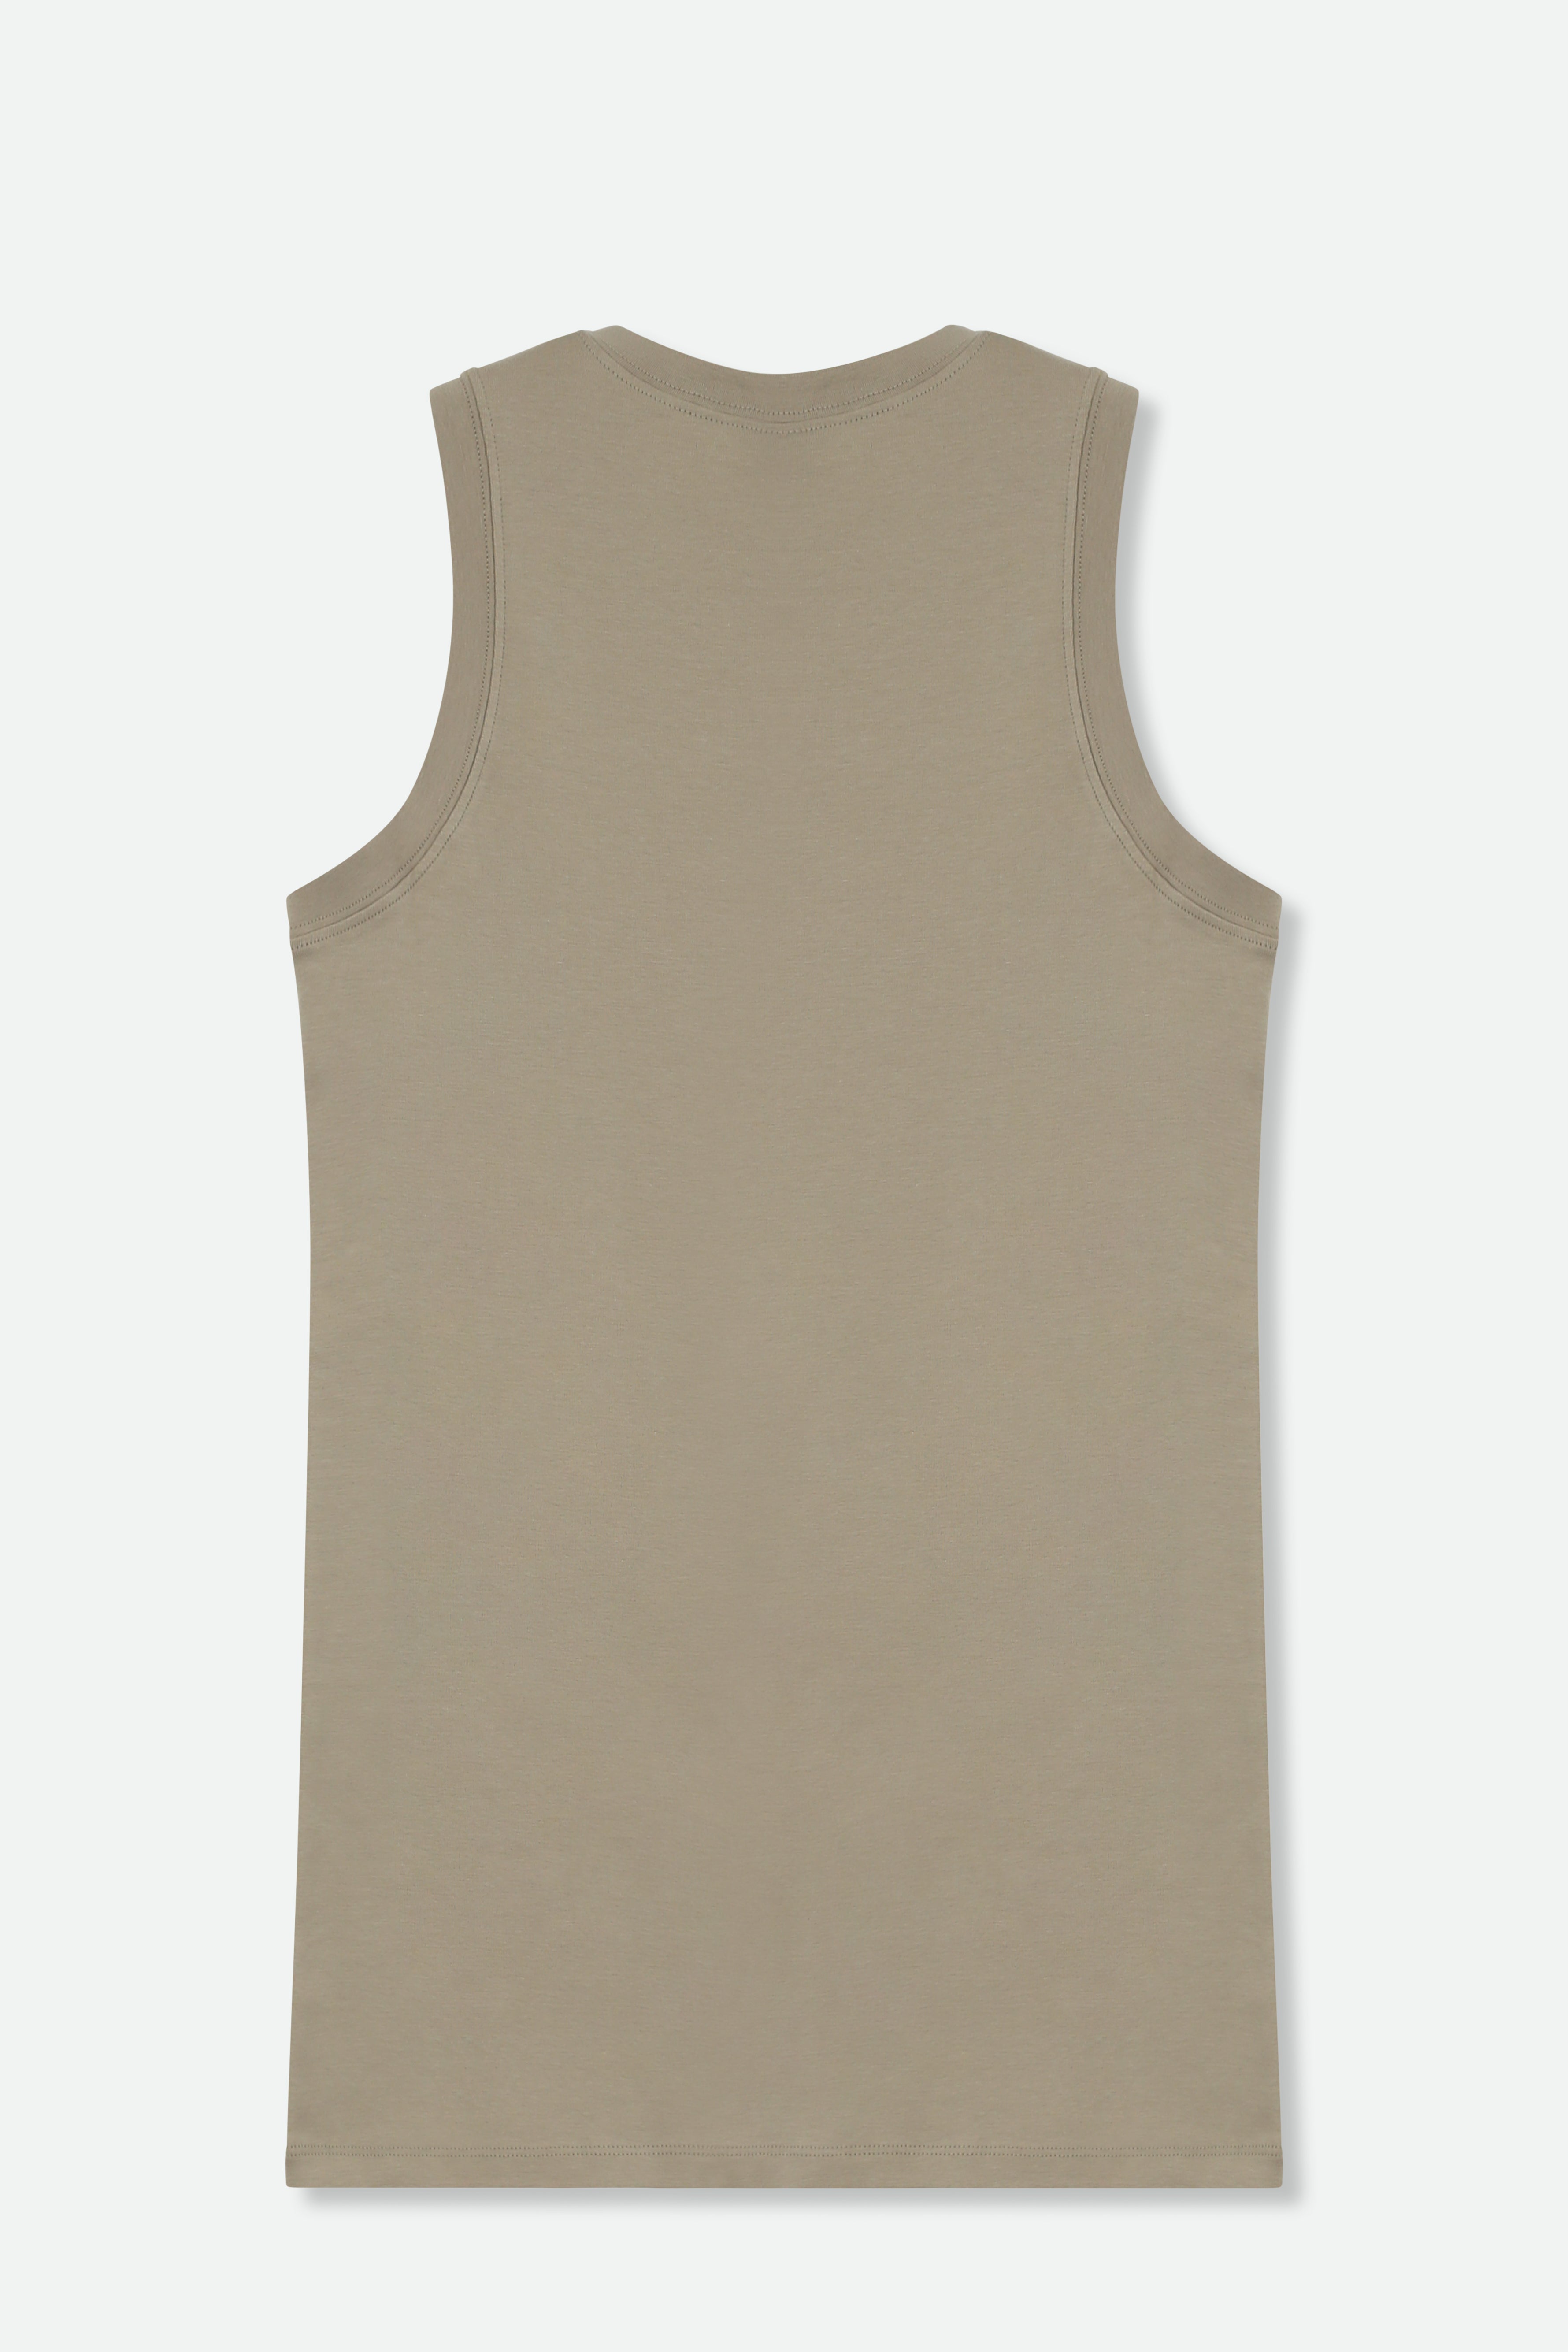 TUNIC LENGTH MUSCLE TANK IN PIMA COTTON STRETCH - Final Few Sizes US 6-10 - Jarbo